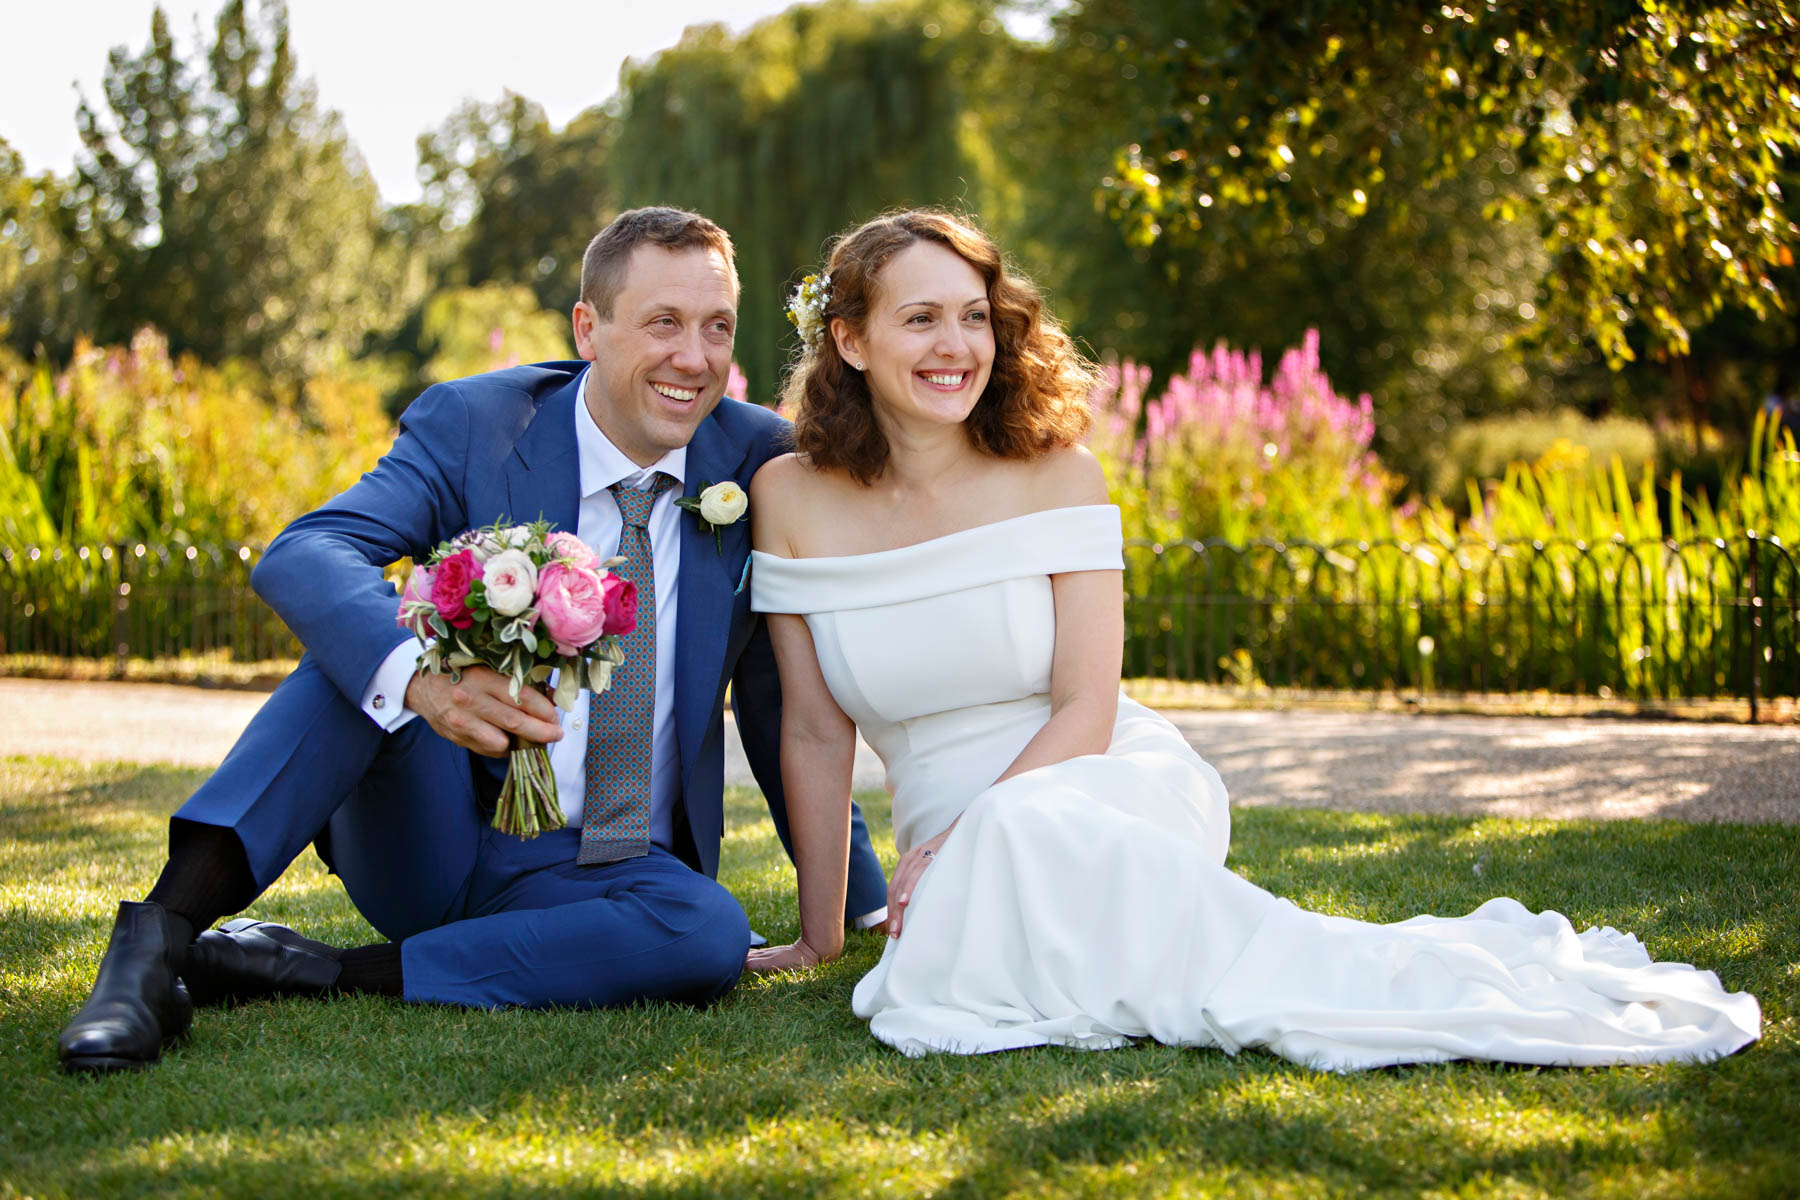 A bride and groom sit on the grass in the rose garden of Regent's Park, after their Soho Room Wedding at Old Marylebone Town Hall. The groom is holding the bride's bouquet and they're both looking off into the distance, smiling.